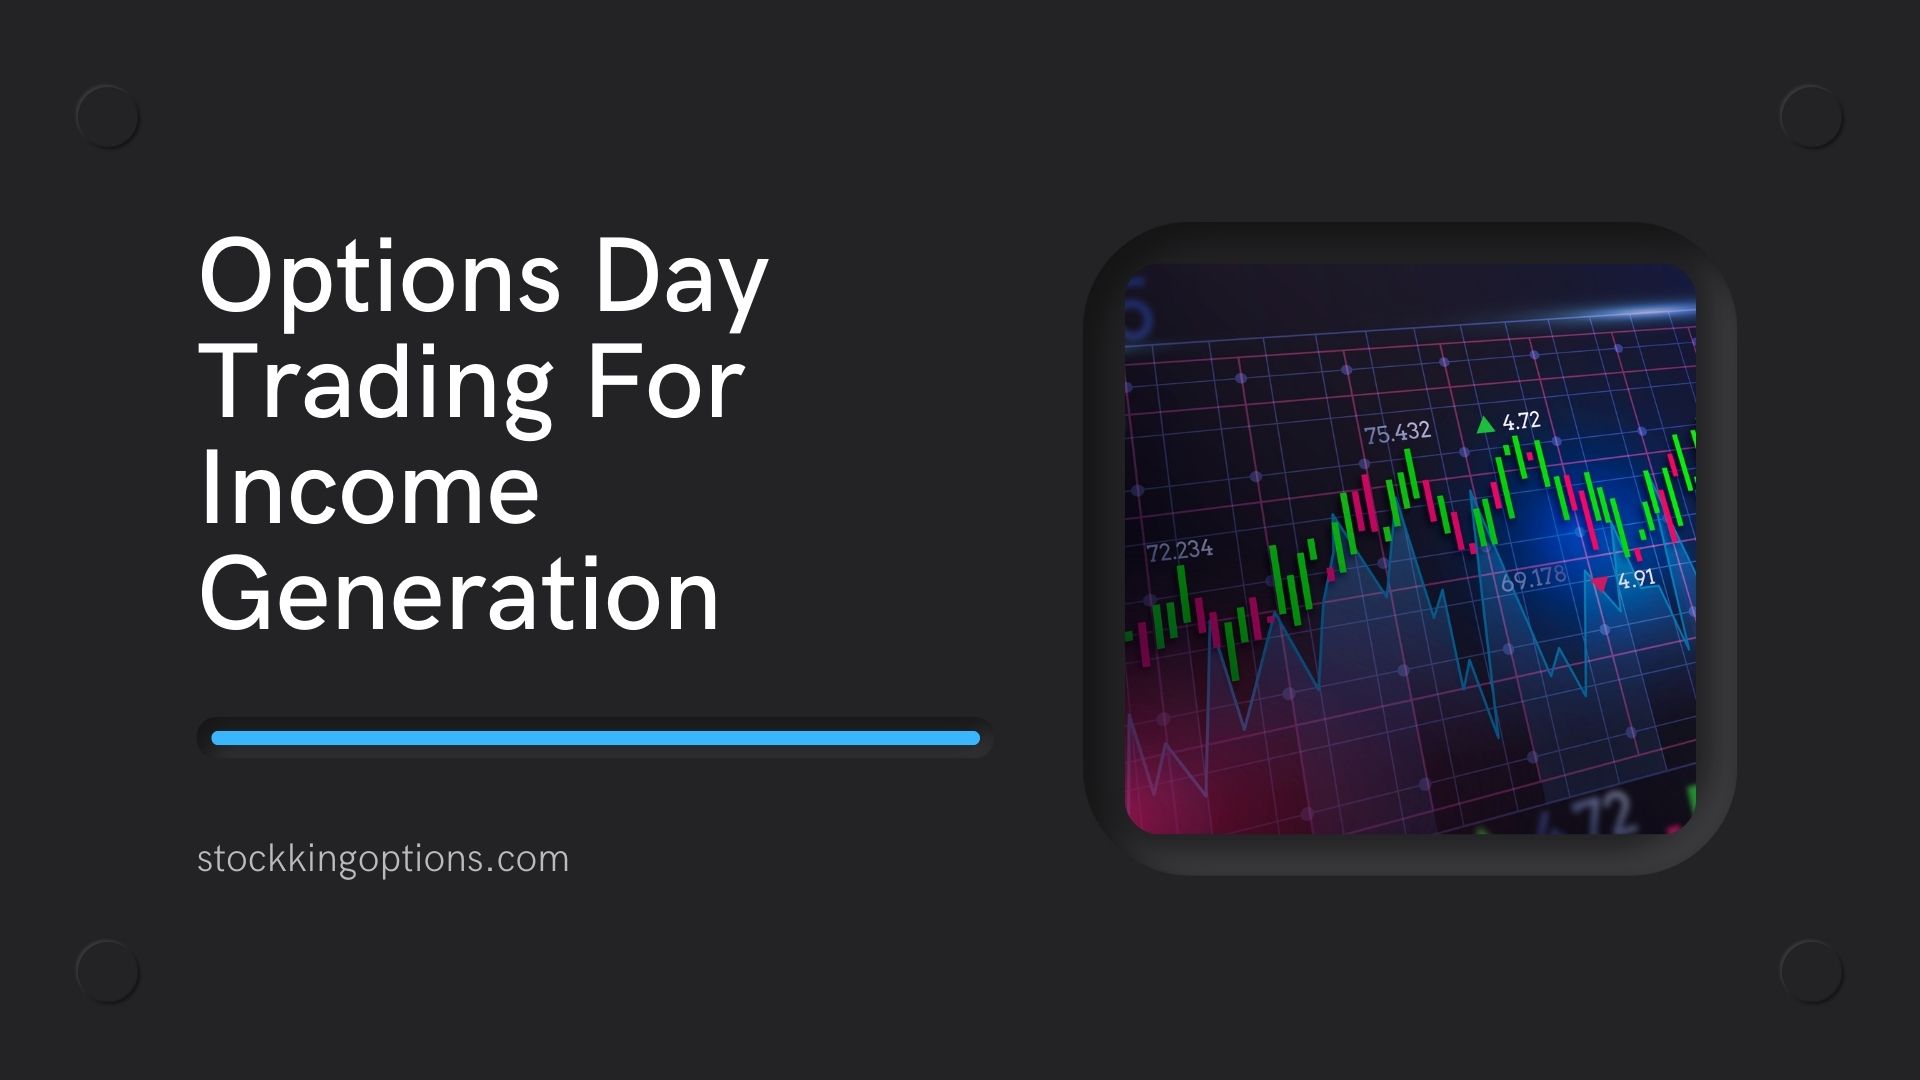 Options Day Trading For Income Generation